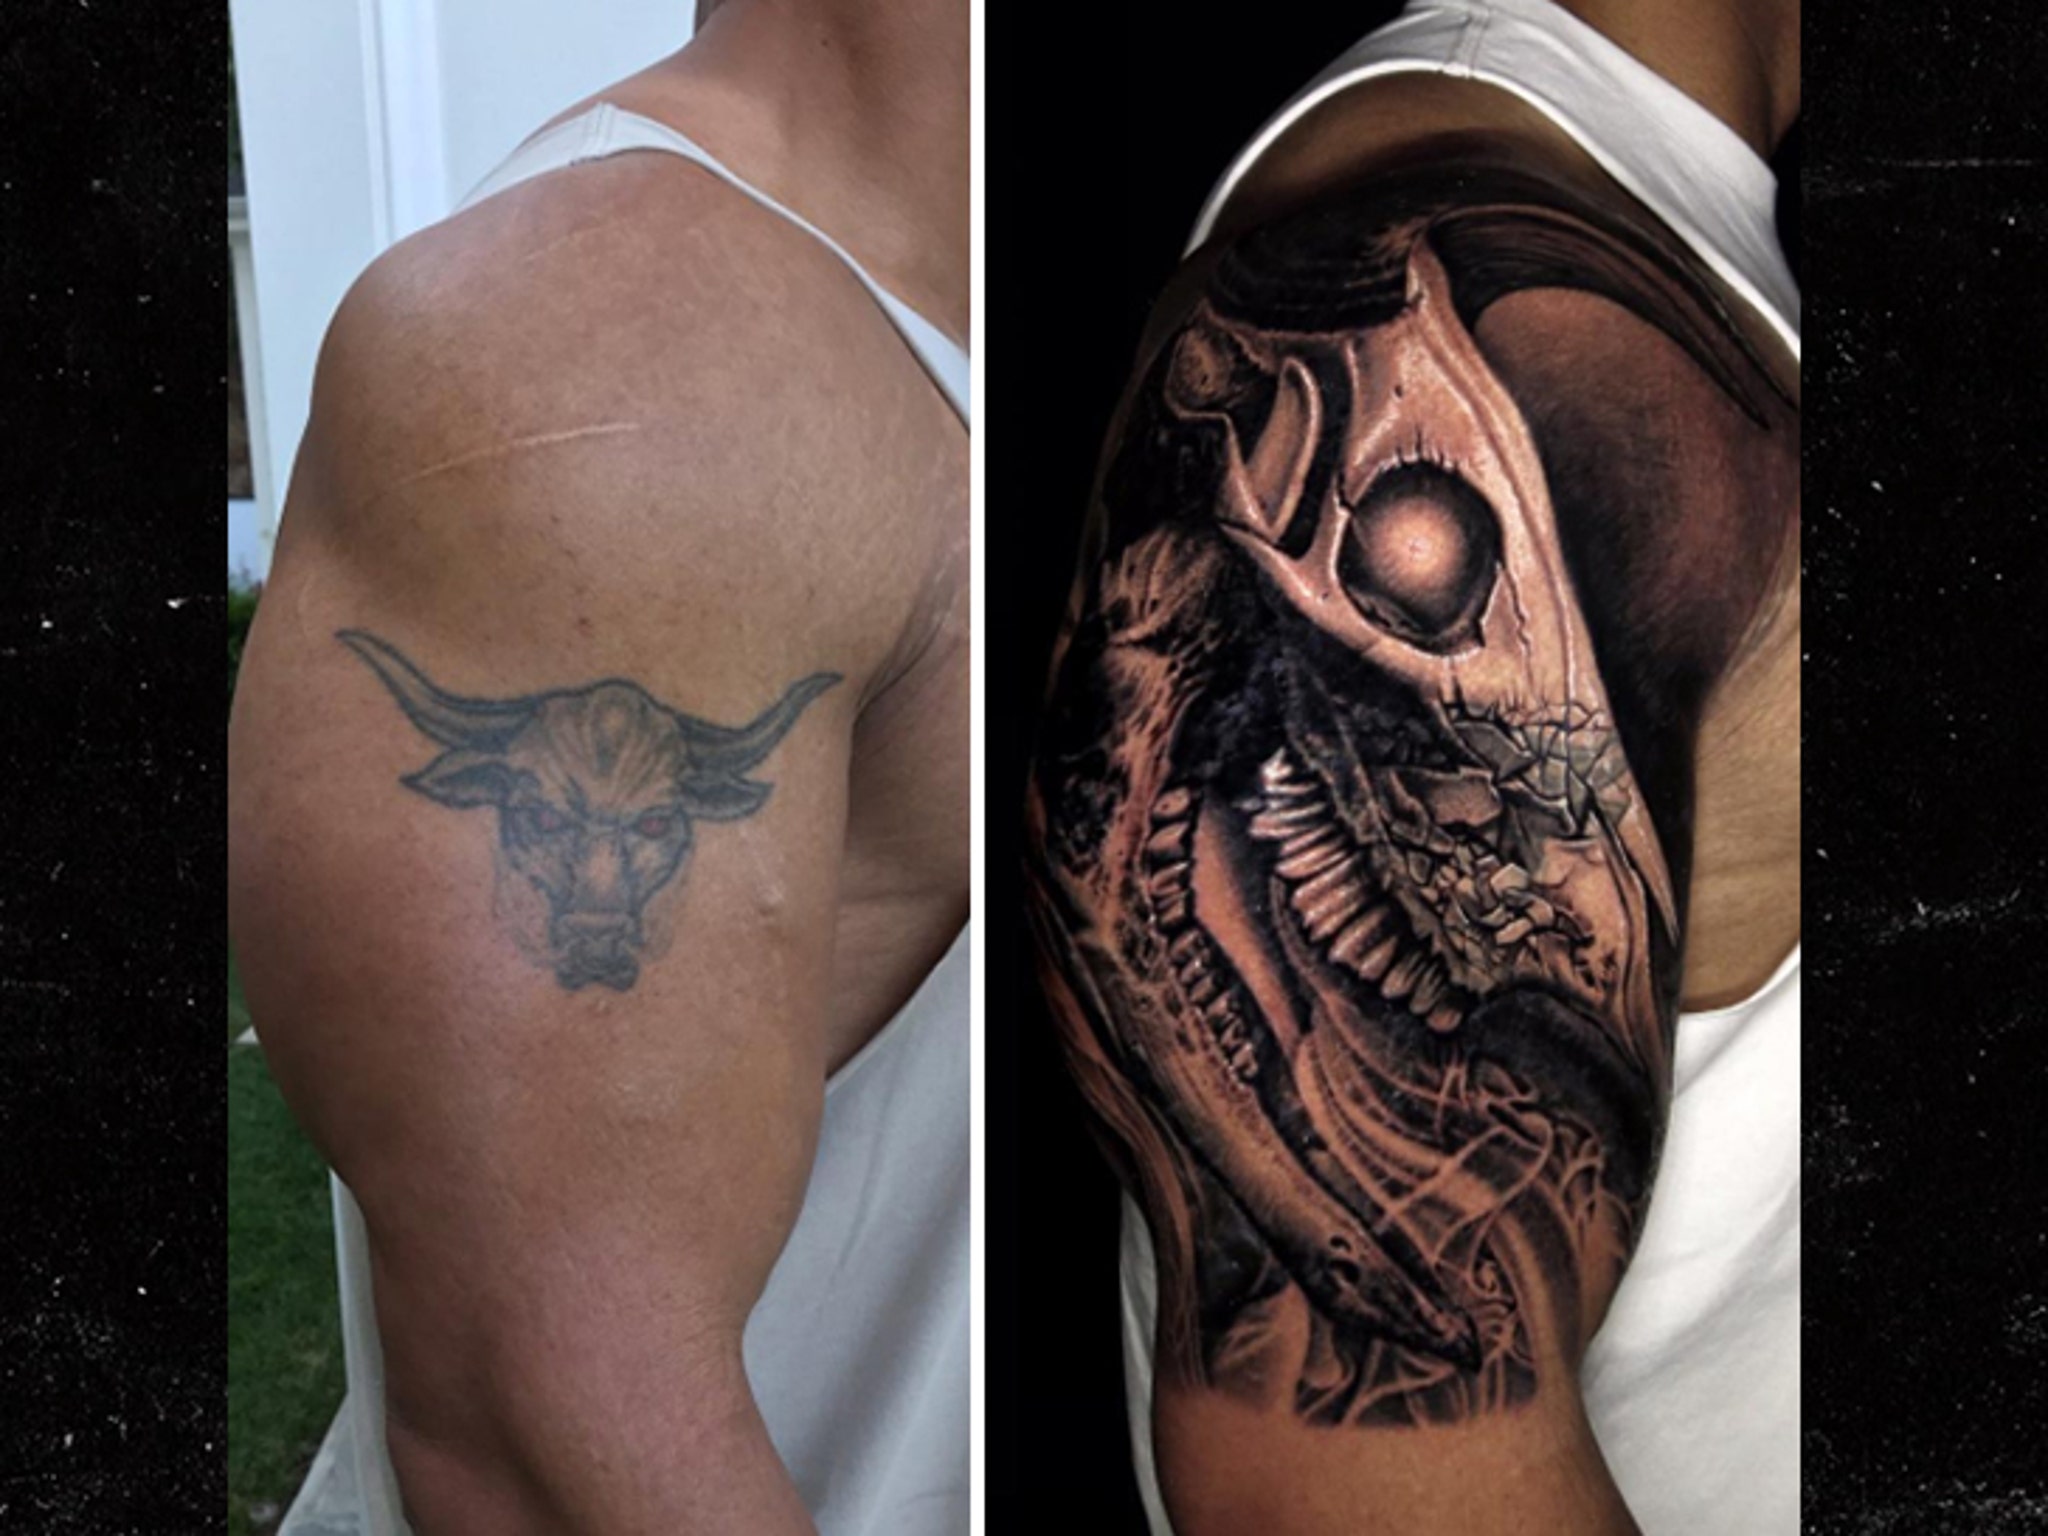 1. The Rock's iconic Brahma Bull shoulder tattoo - wide 3